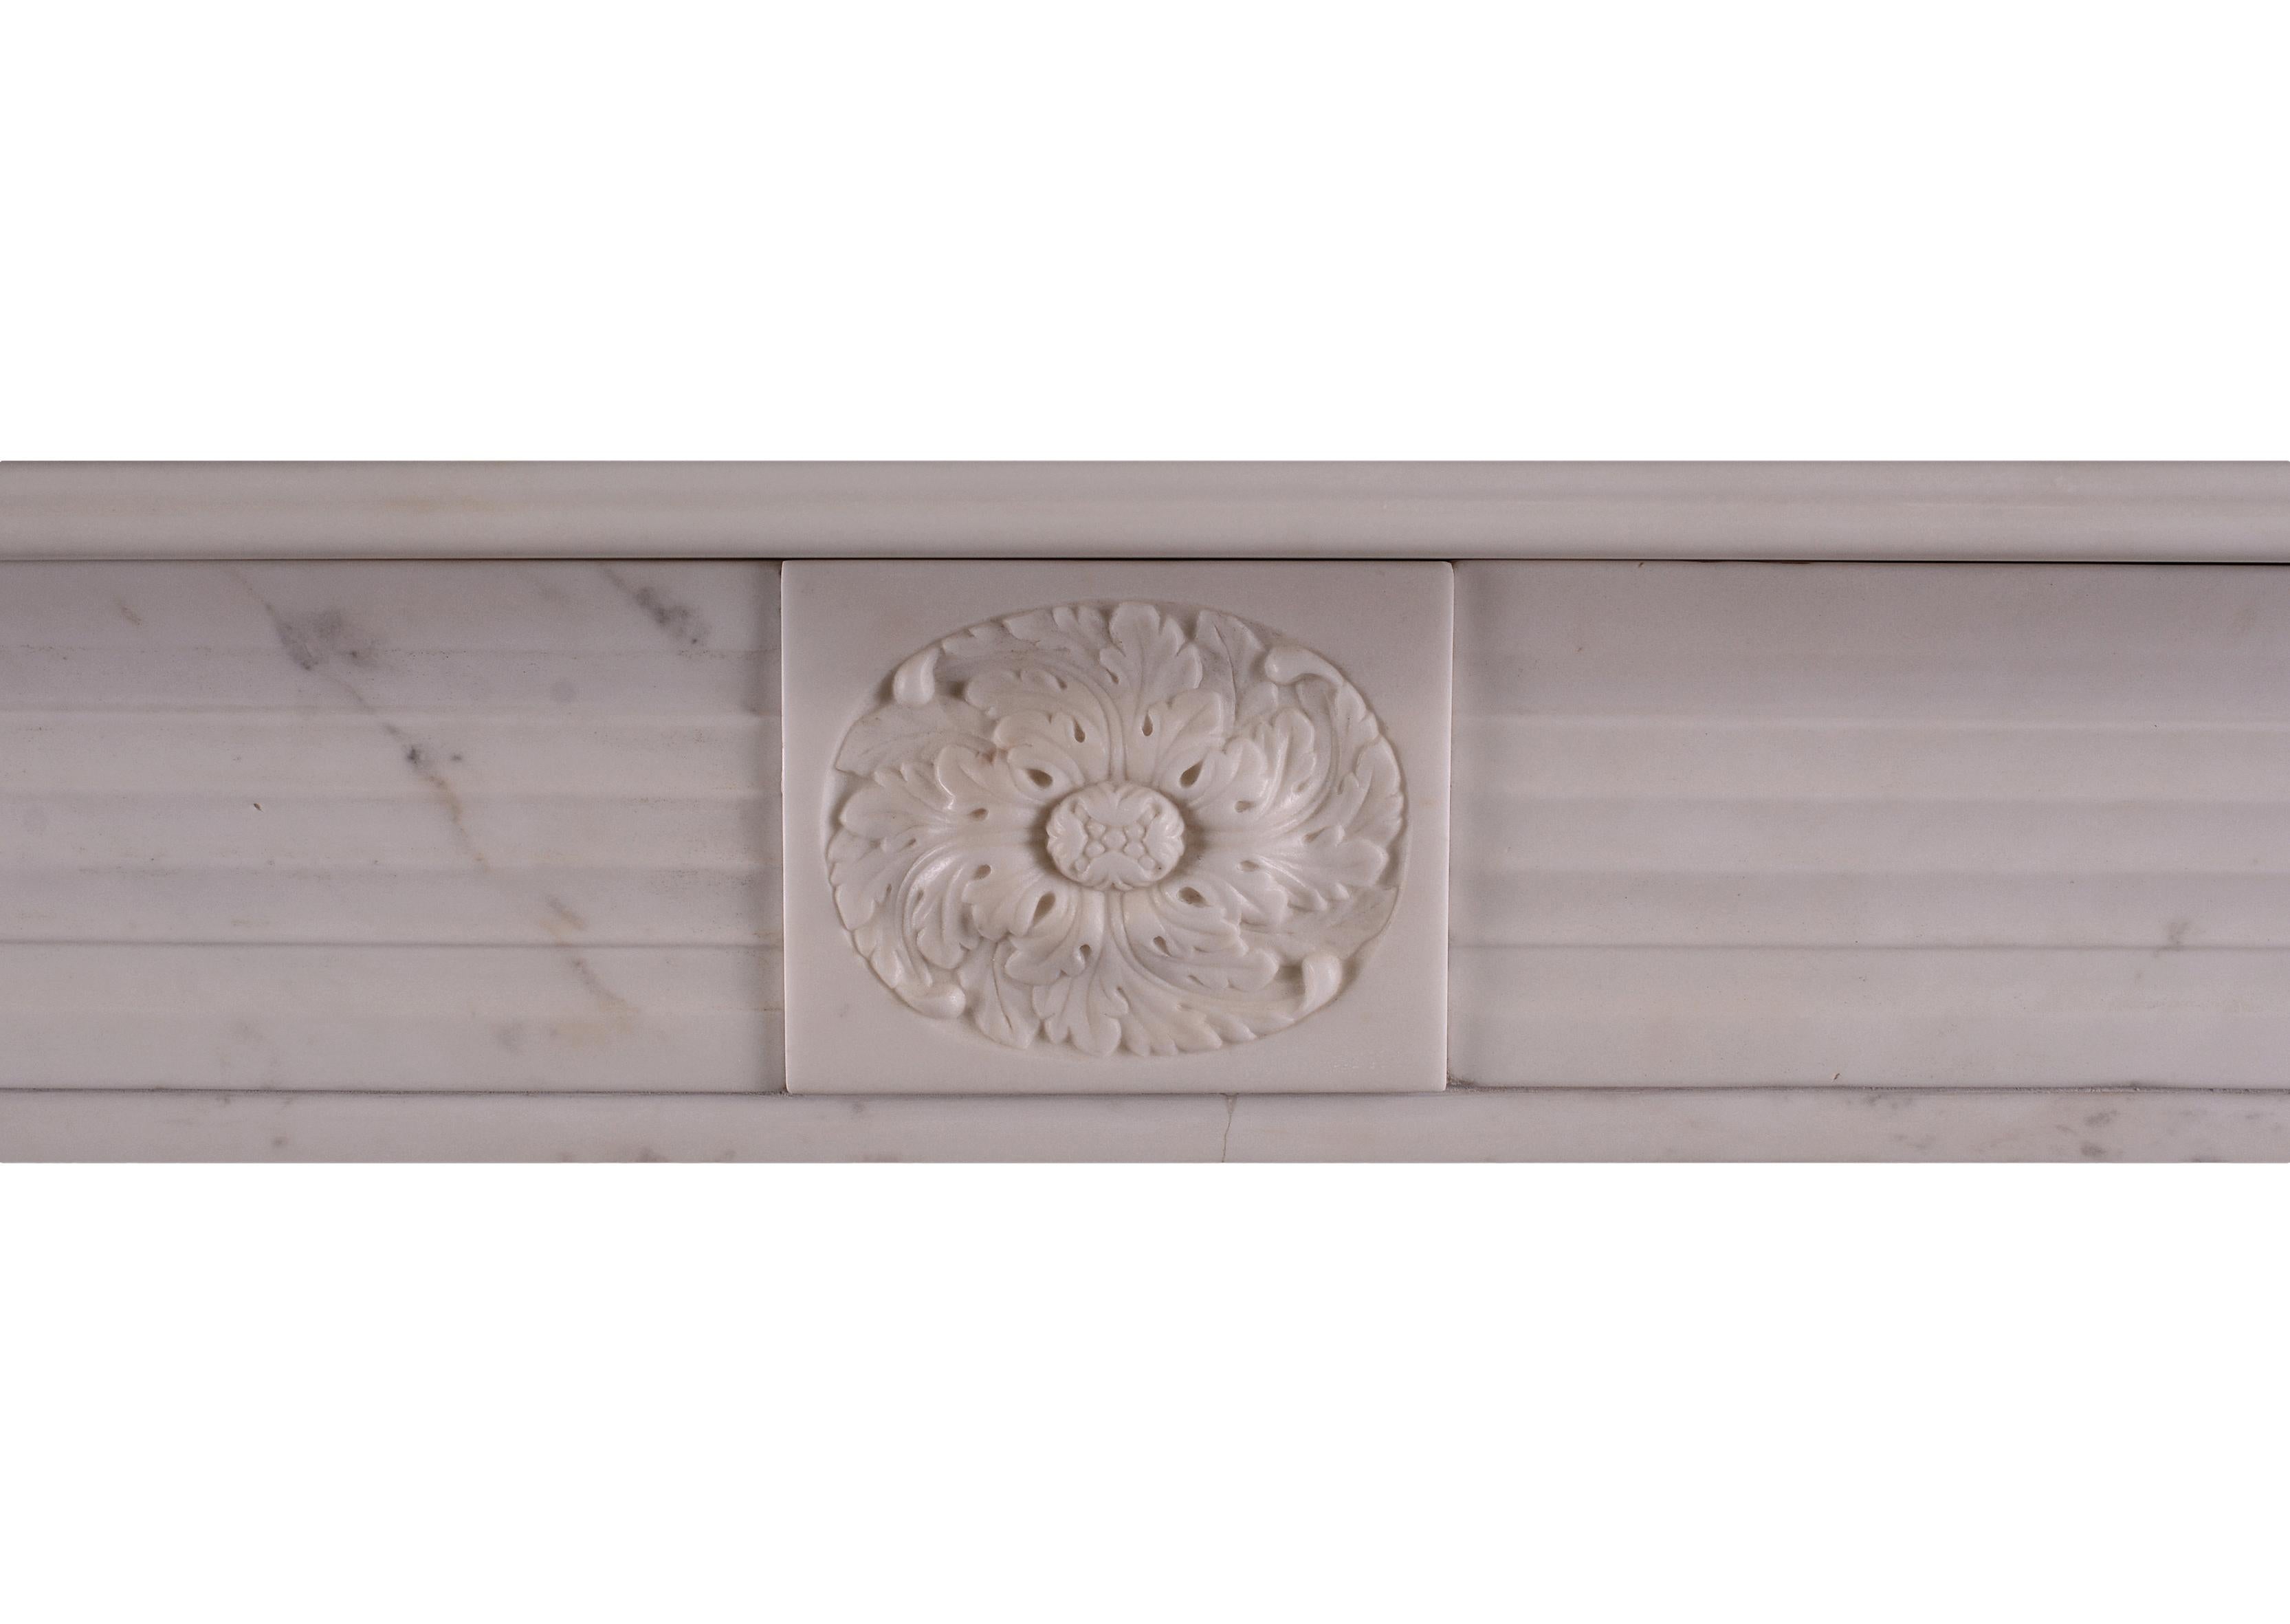 A period English Regency fireplace in statuary marble. The jambs with half rounded reeds surmounted by roundel end blockings. Carved central paterae to frieze, English, circa 1820. One of a very near pair with stock no 3961.

Measurements:
Shelf